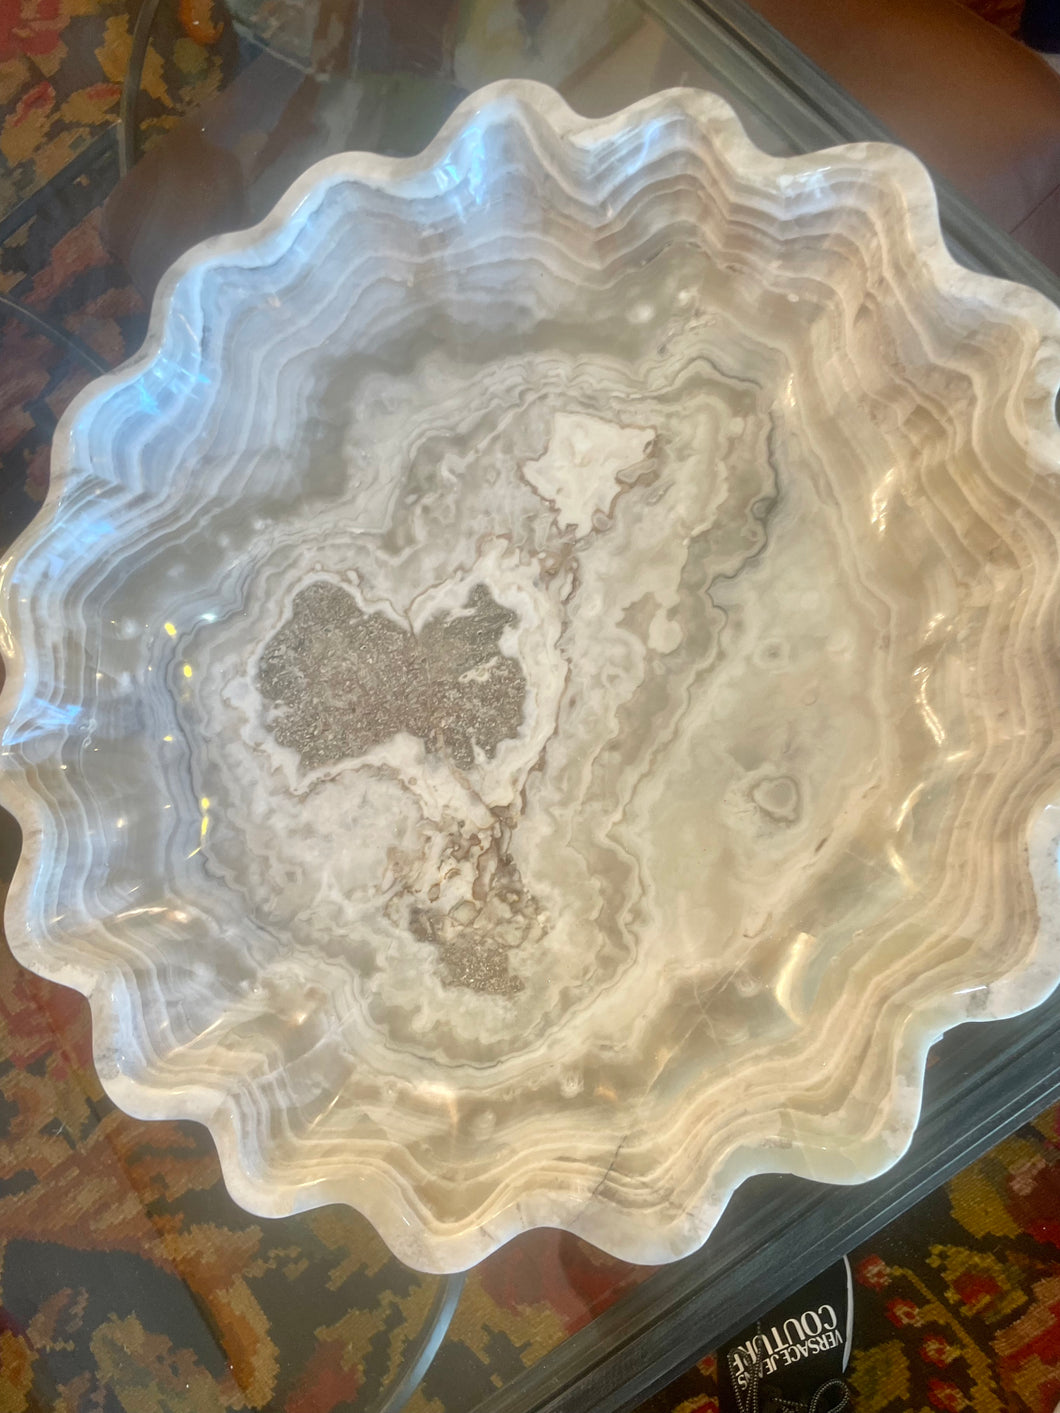 Starry Onyx Tray - One of a kind find!